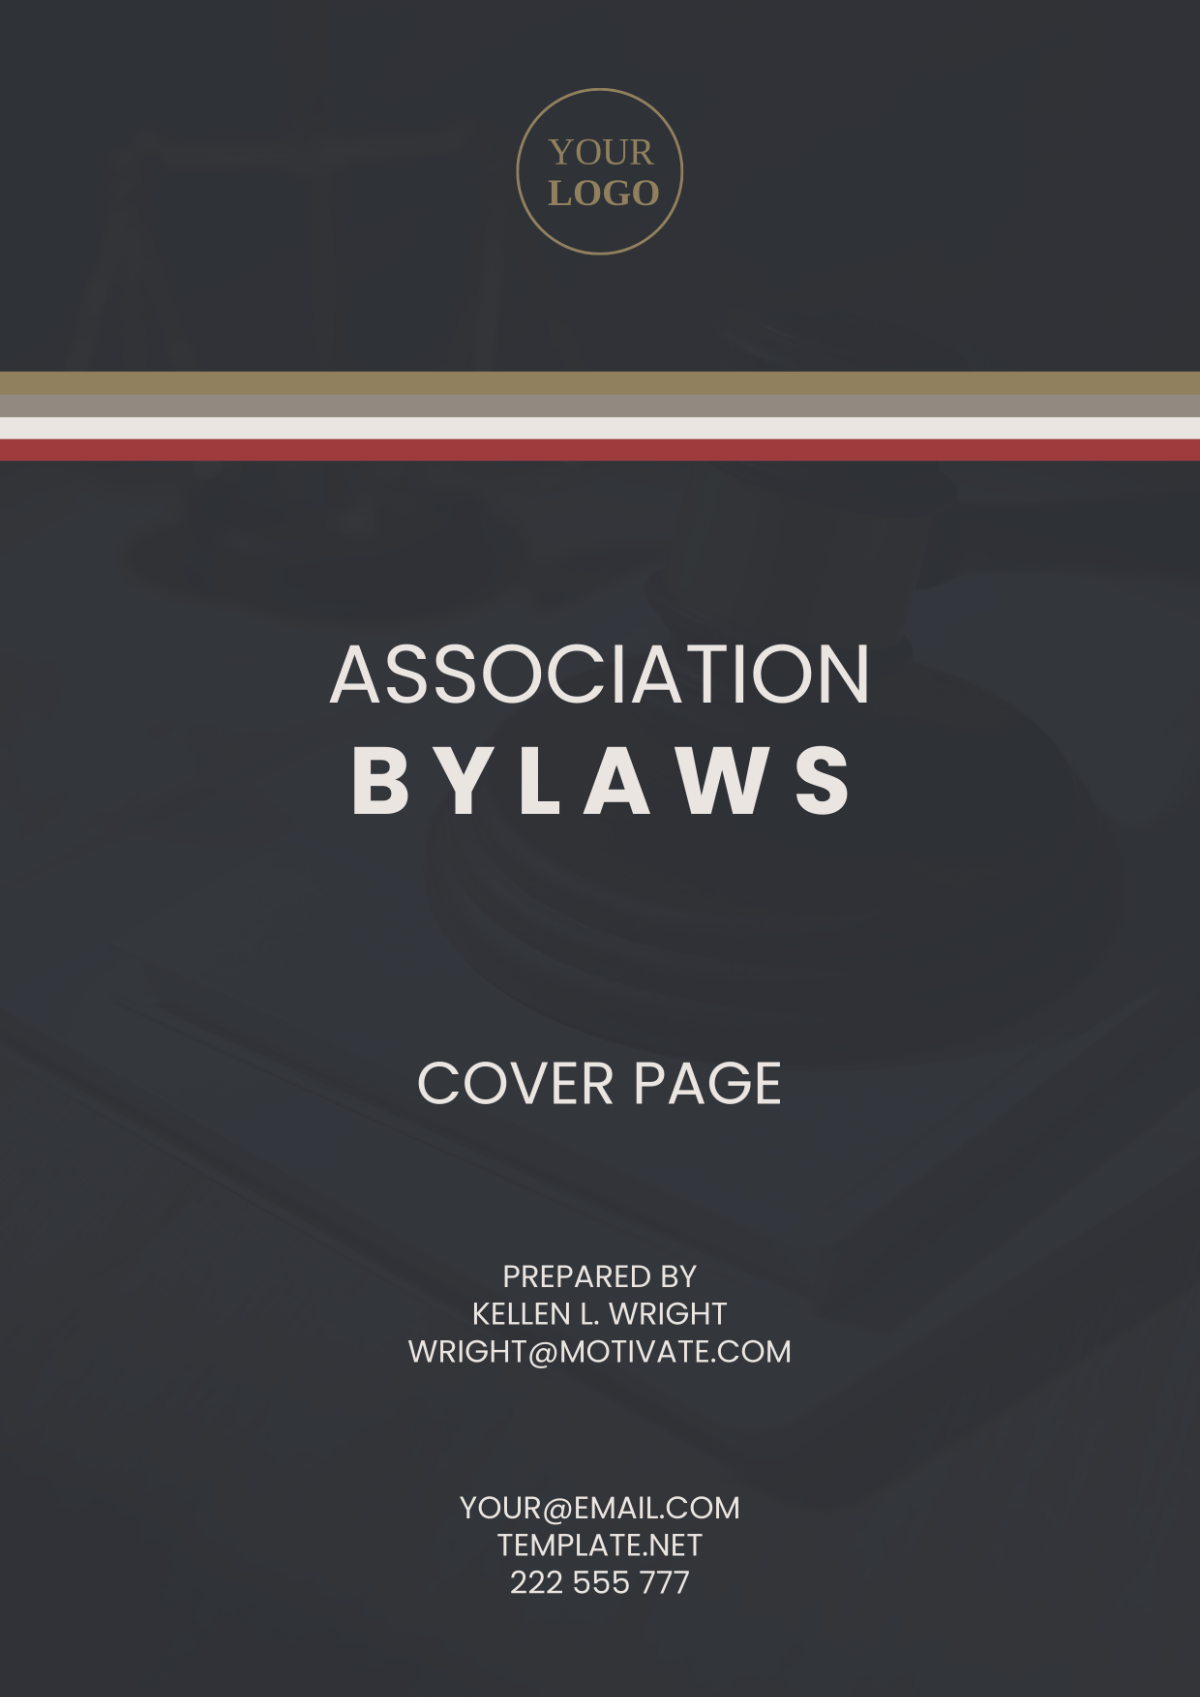 Association Bylaws Cover Page Template